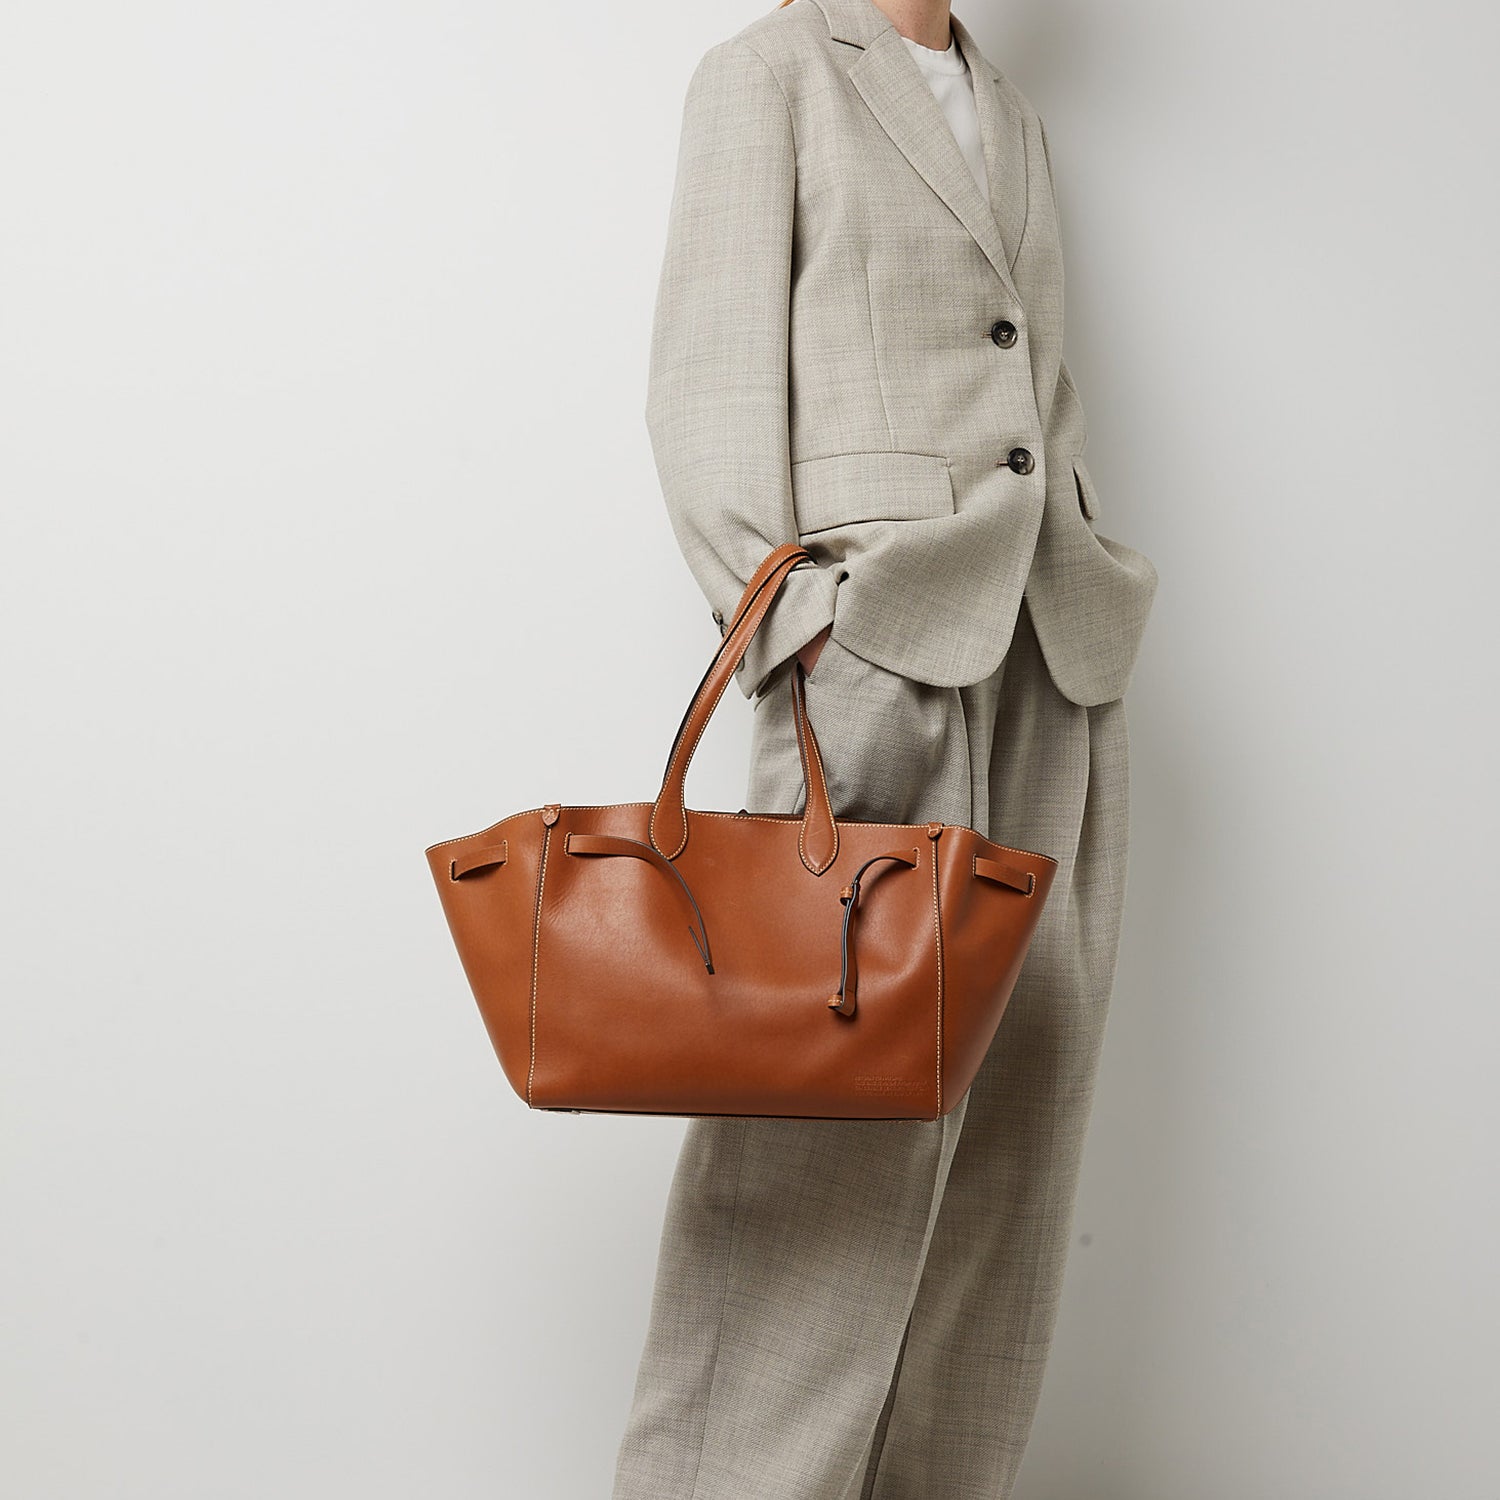 Return to Nature Tote -

                  
                    Compostable Leather in Tan -
                  

                  Anya Hindmarch UK
